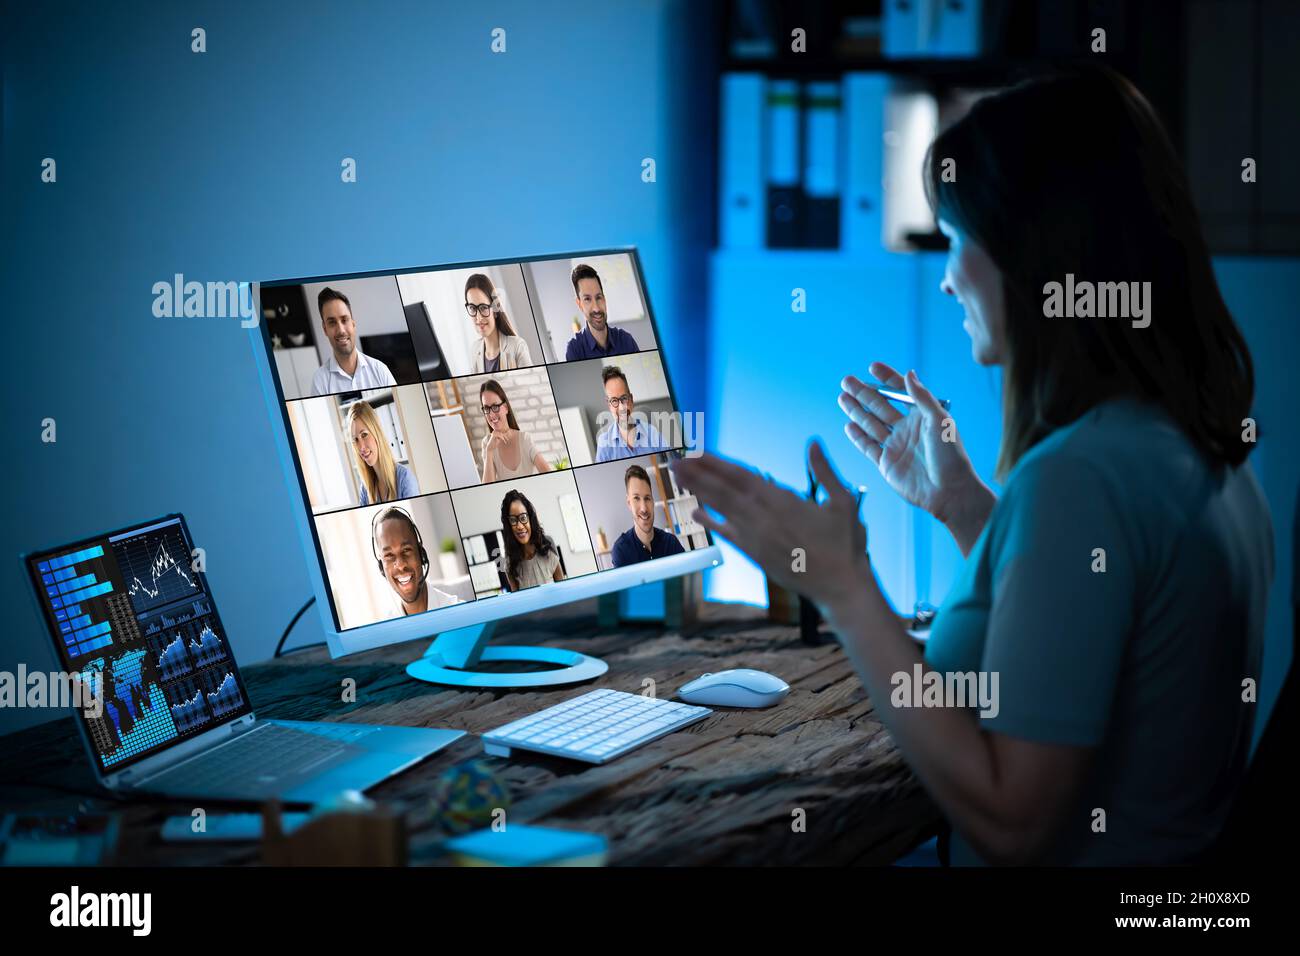 Remote Learning Video Conference Business Call Online Stock Photo